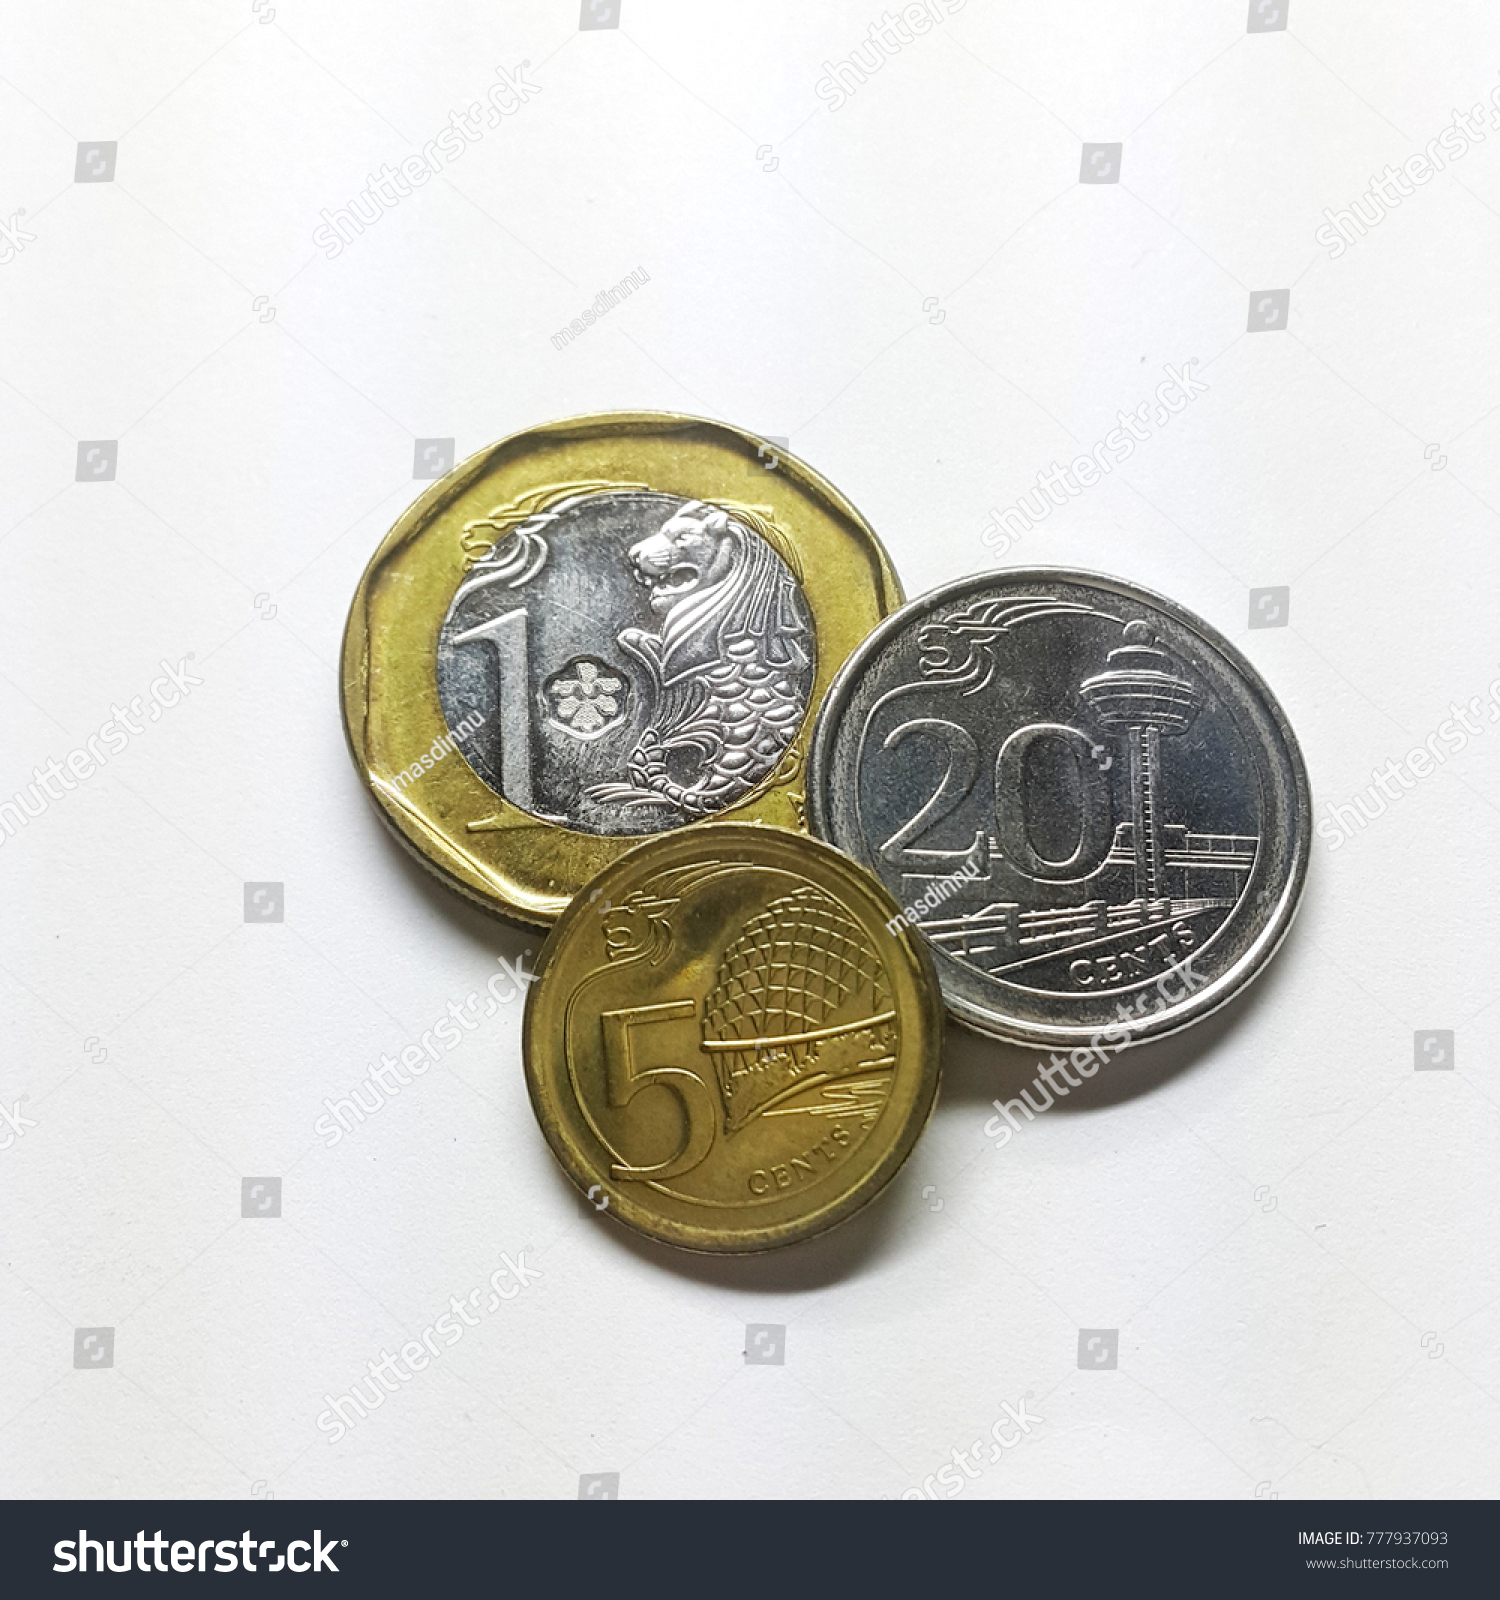 coin money of Singapore #777937093